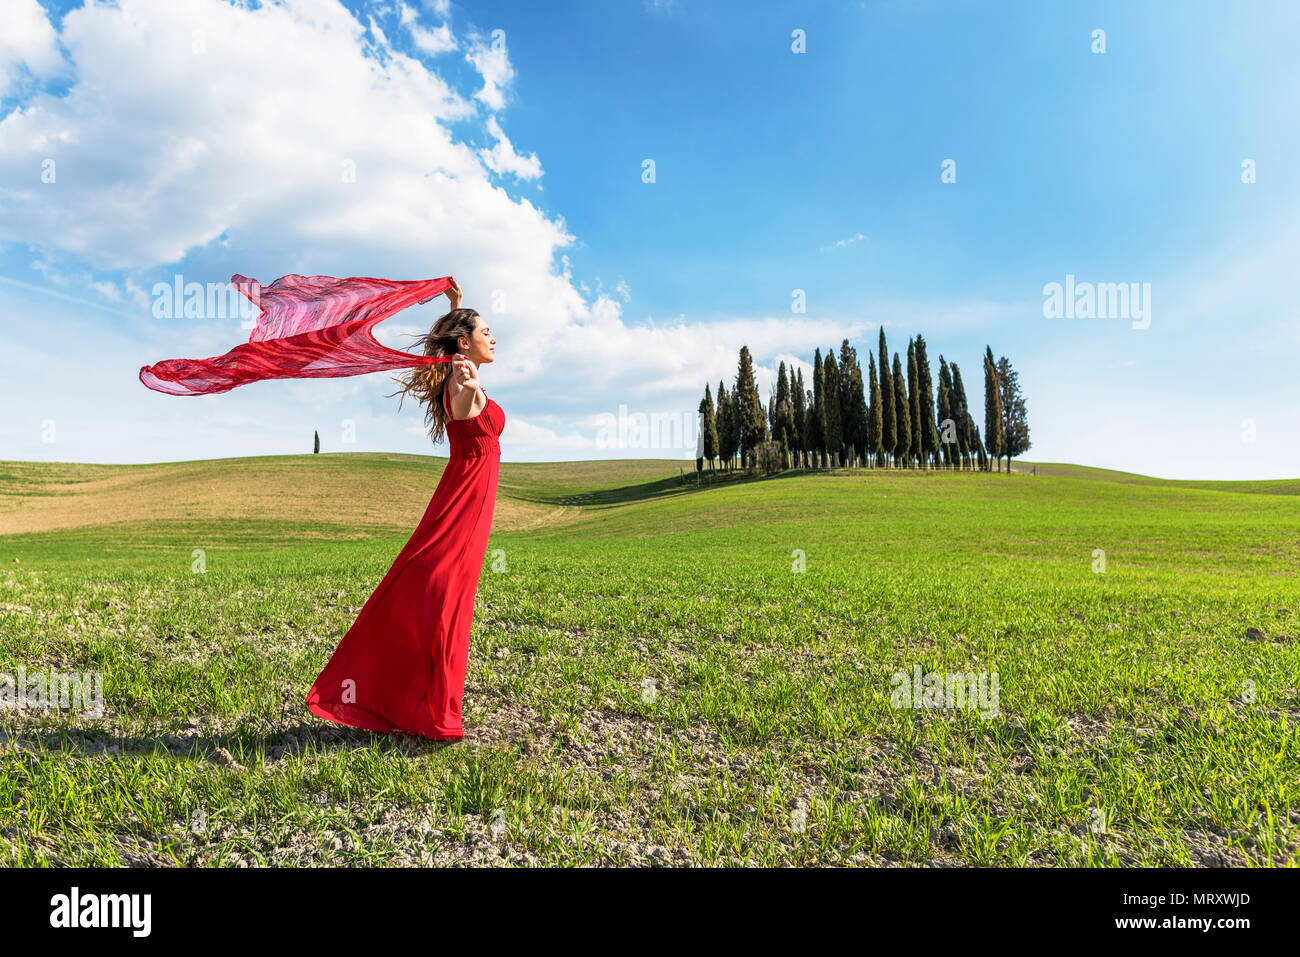 San Quirico d'Orcia, Orcia valley, Siena, Tuscany, Italy. A young woman in red dress relaxing in a wheat field near the cypresses of Orcia valley Stock Photo